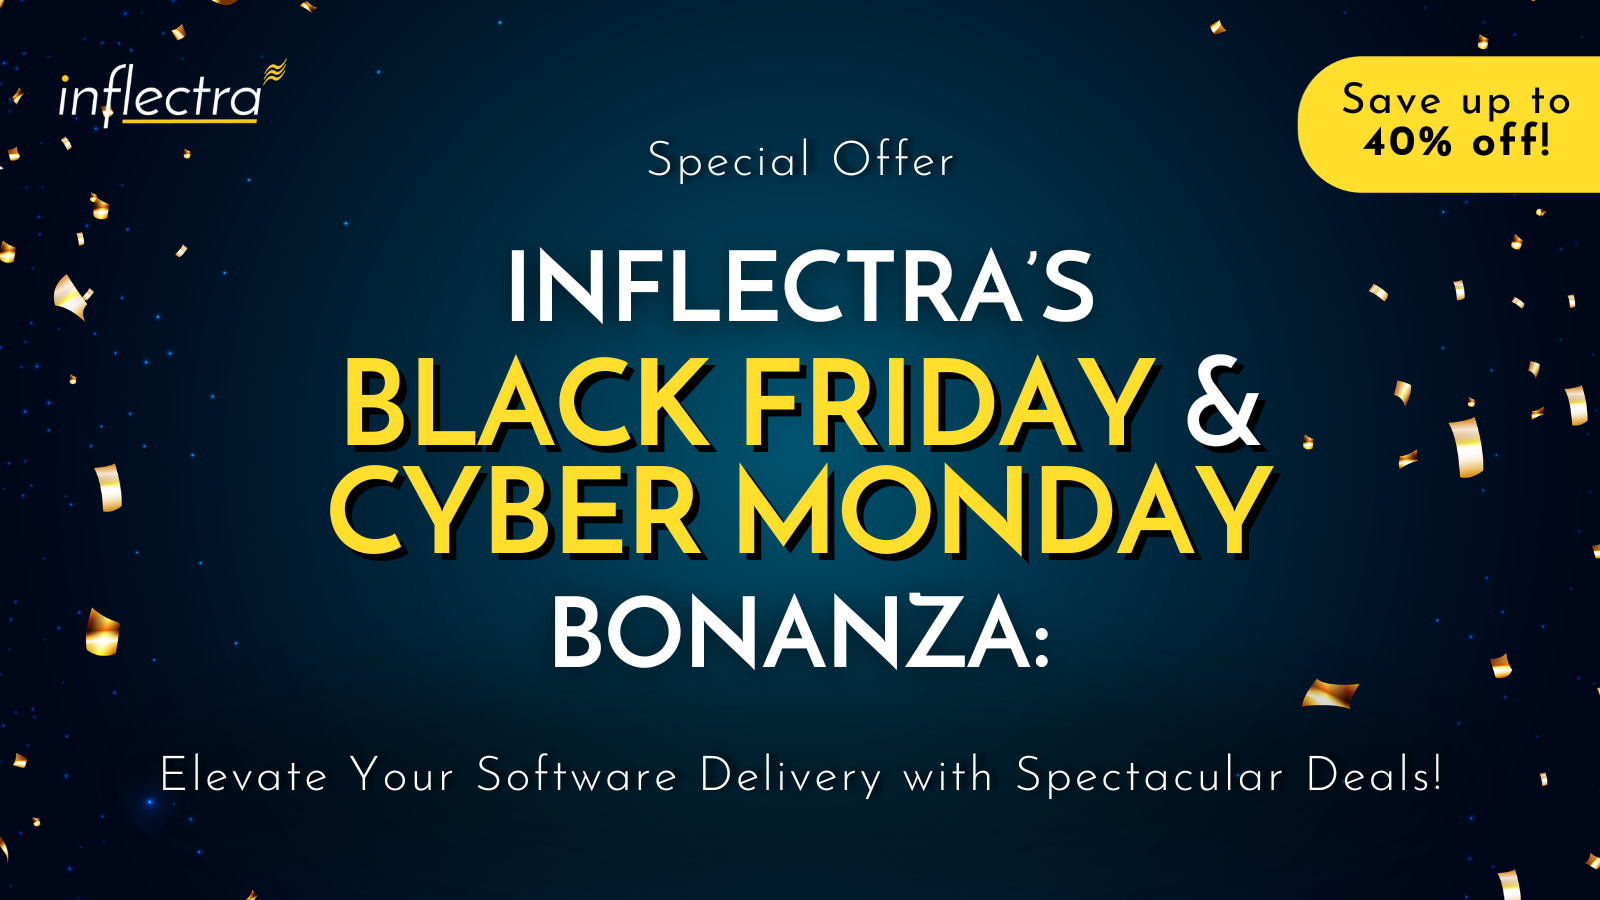 inflectra-offers-limited-time-black-friday-and-cyber-monday-sale-to-elevate-your-software-delivery-celebration-image